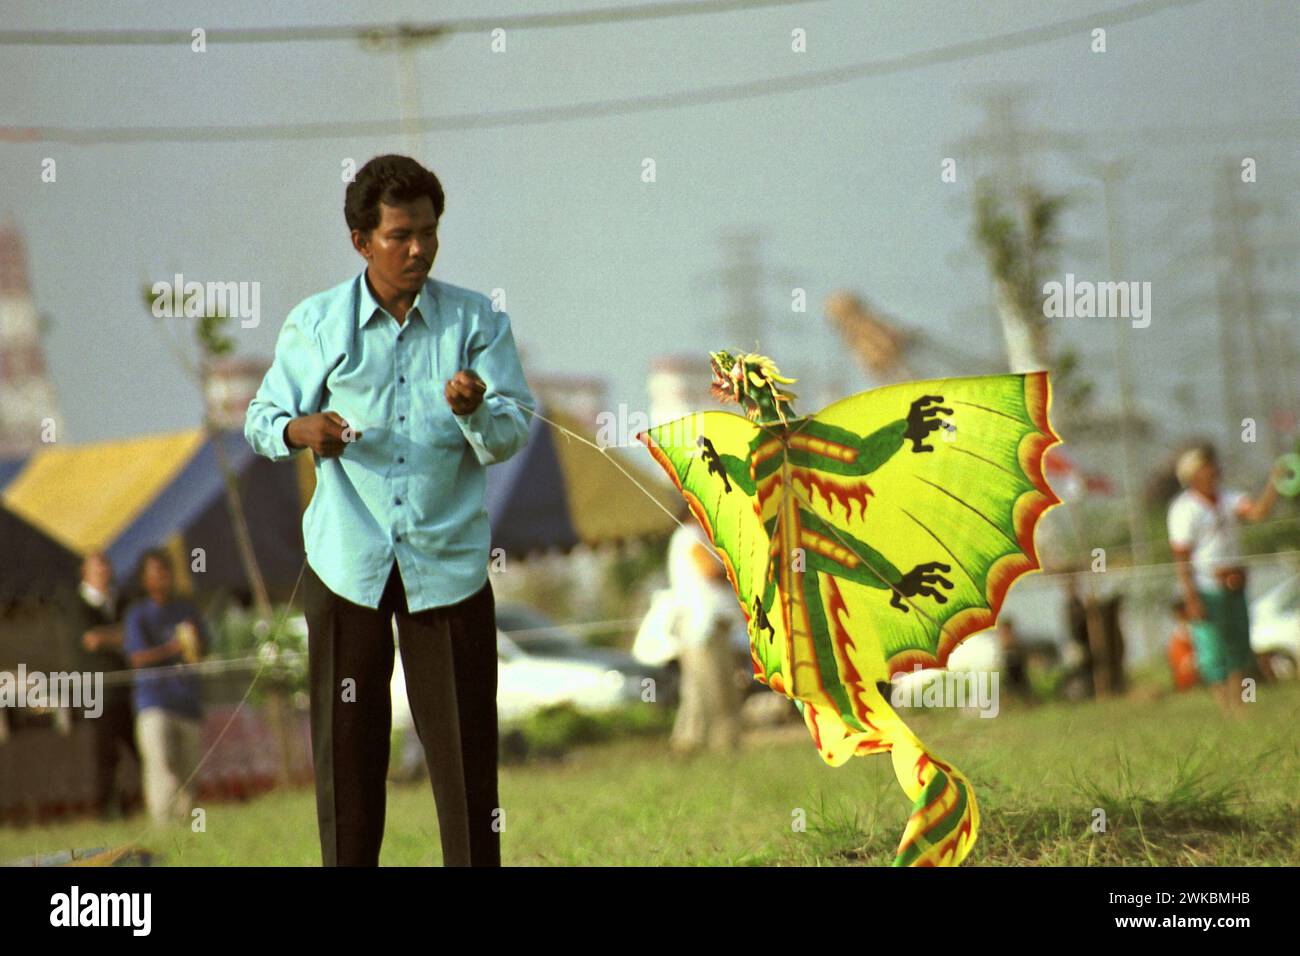 A participant prepares a kite during the 2004 Jakarta International Kite Festival that held on July 9-11 at Carnival Beach in Ancol Dreamland, Ancol, Penjaringan, North Jakarta, Jakarta, Indonesia. Stock Photo